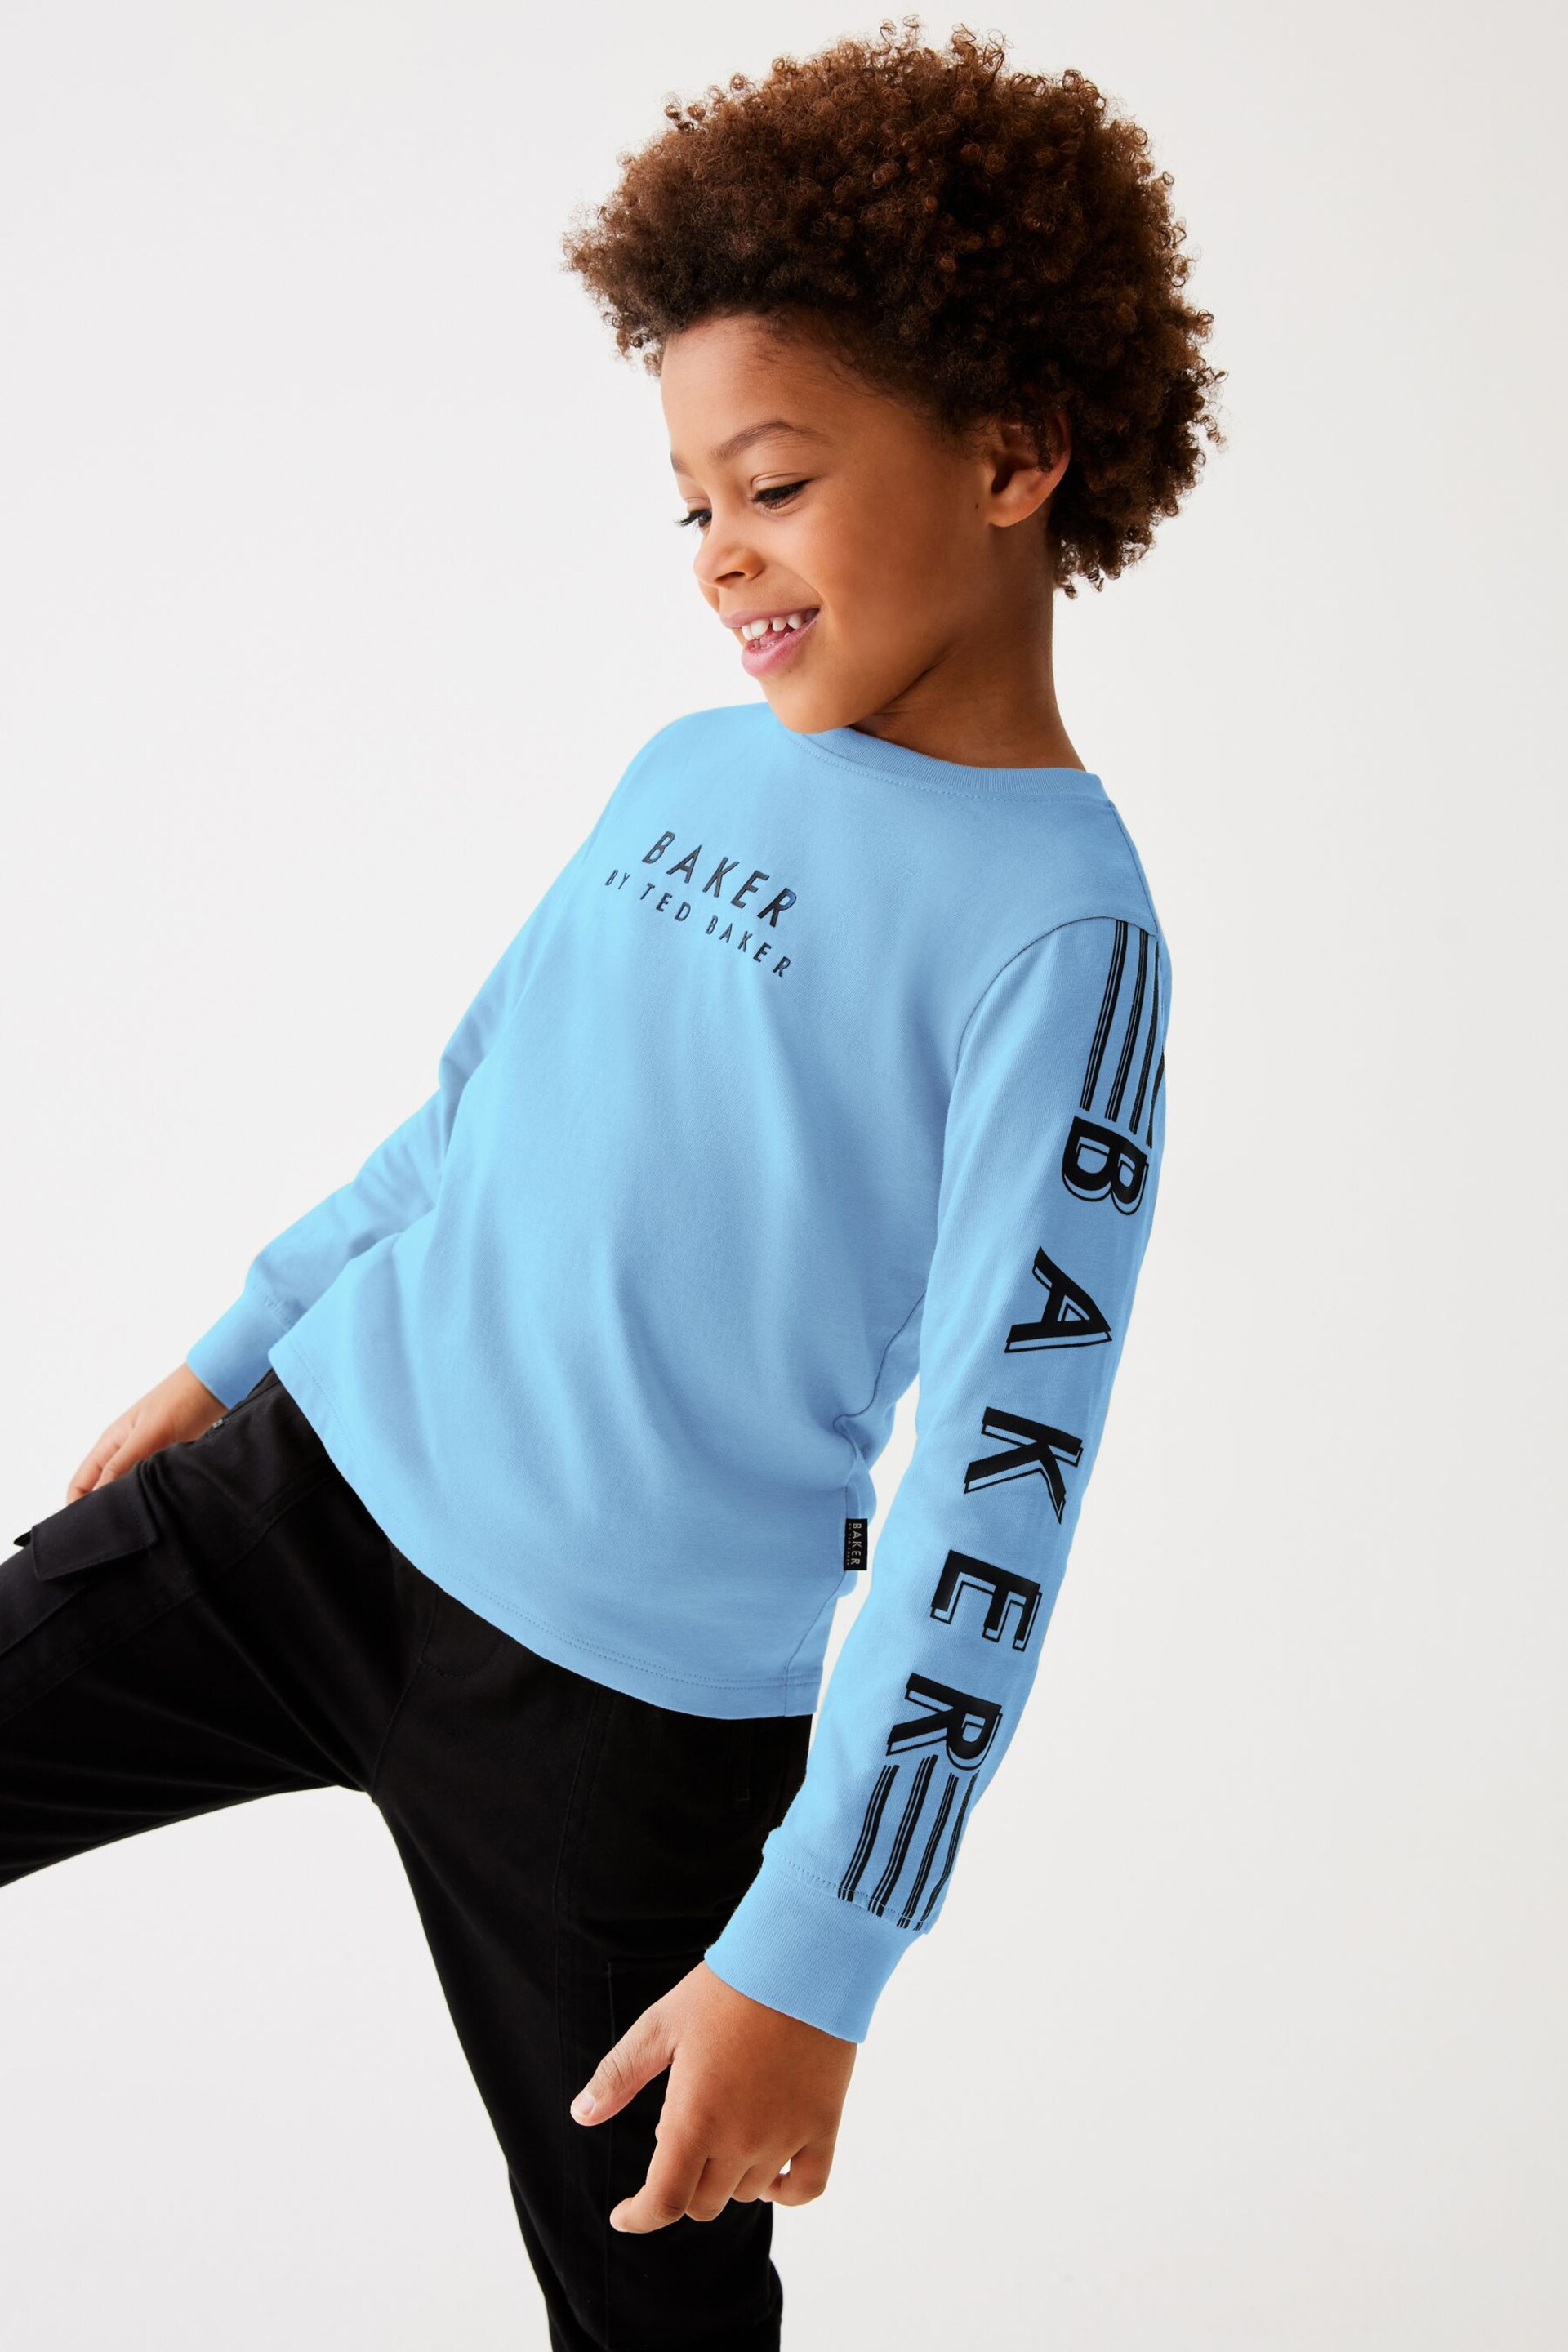 Baker by Ted Baker Long Sleeve T-Shirt - Image 7 of 14